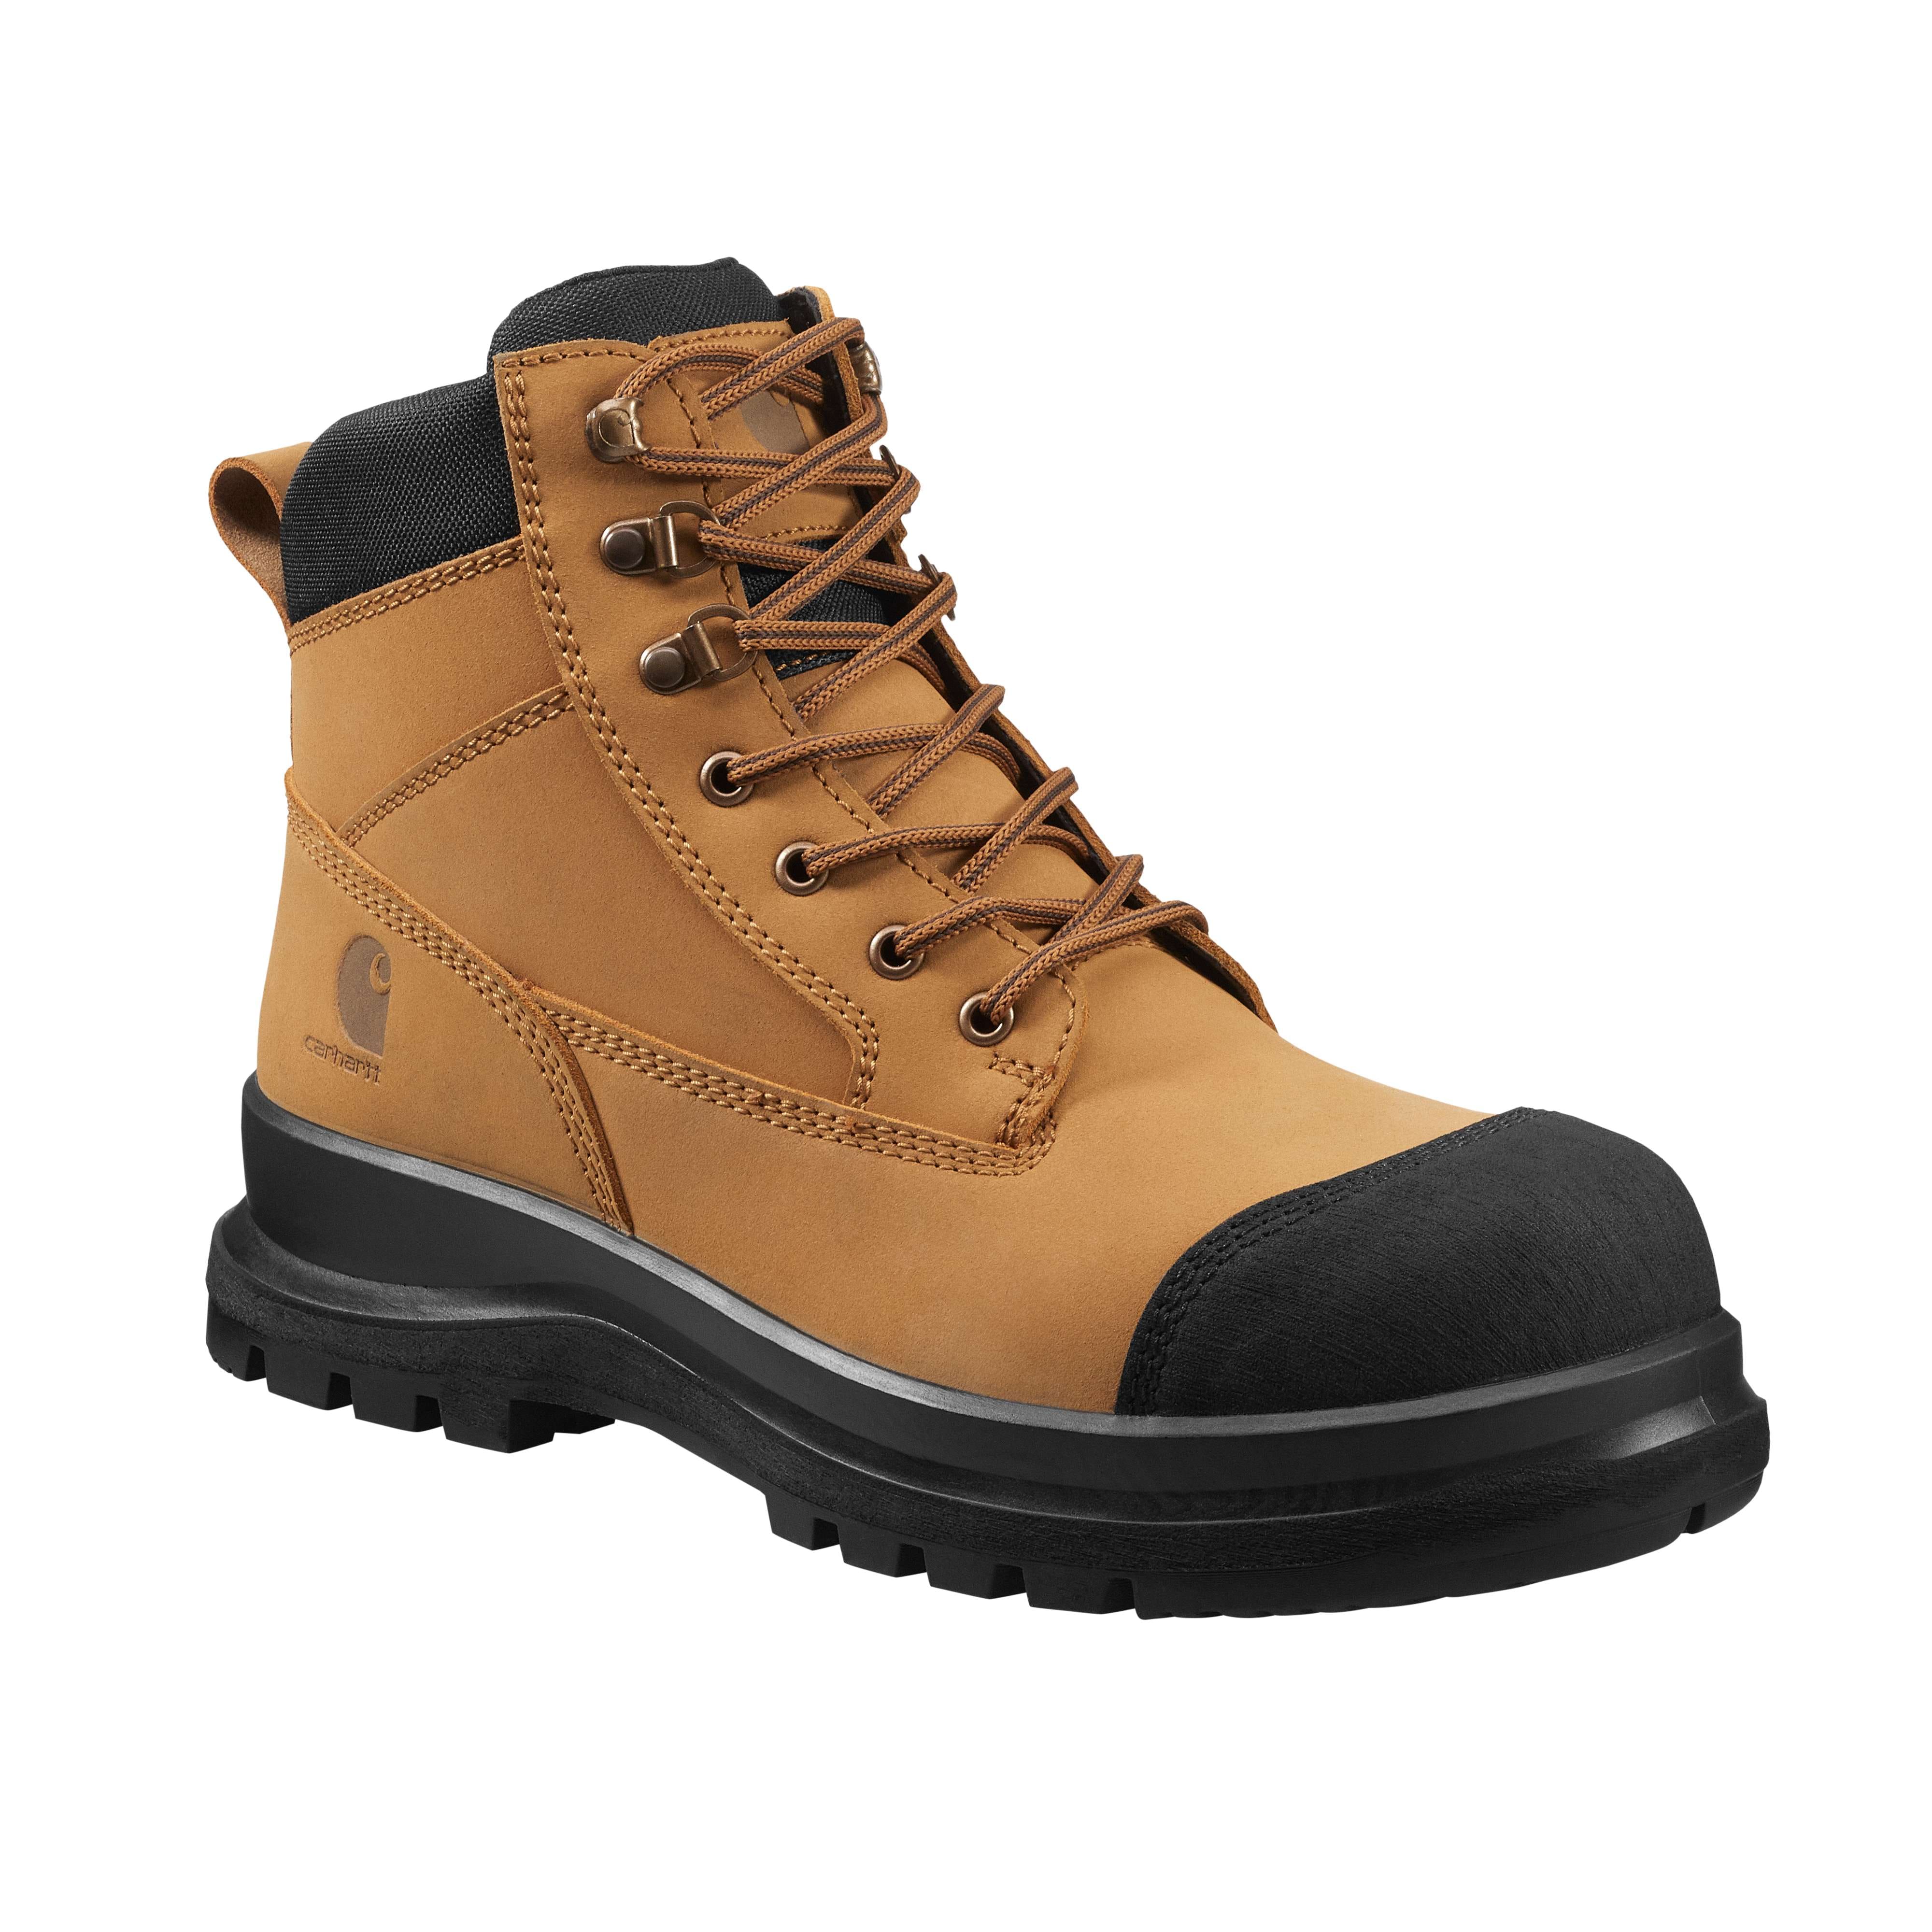 DETROIT RUGGED S3 INCH SAFETY BOOT | Carhartt®